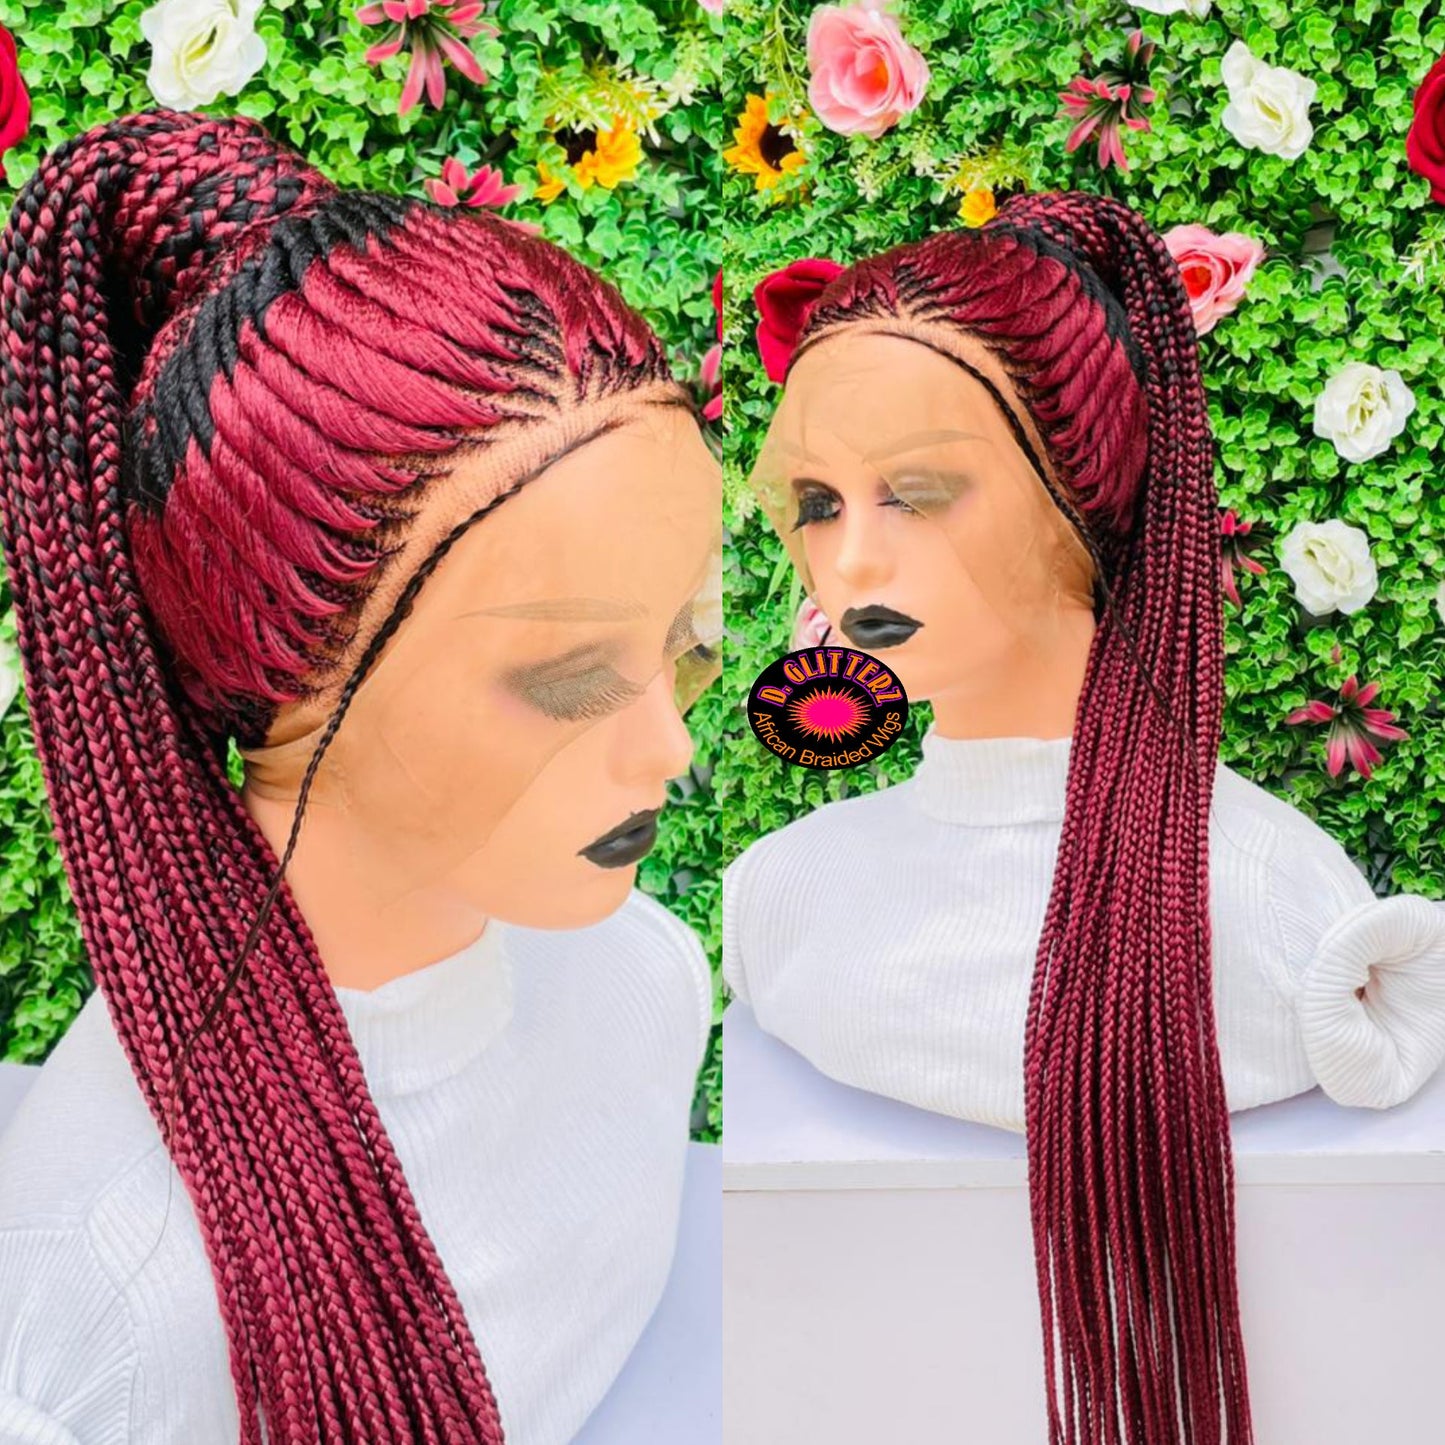 TISSUE PONYTAIL BRAIDED WIGS ON 360 LACE CLOSURES - d.glitterzwigs